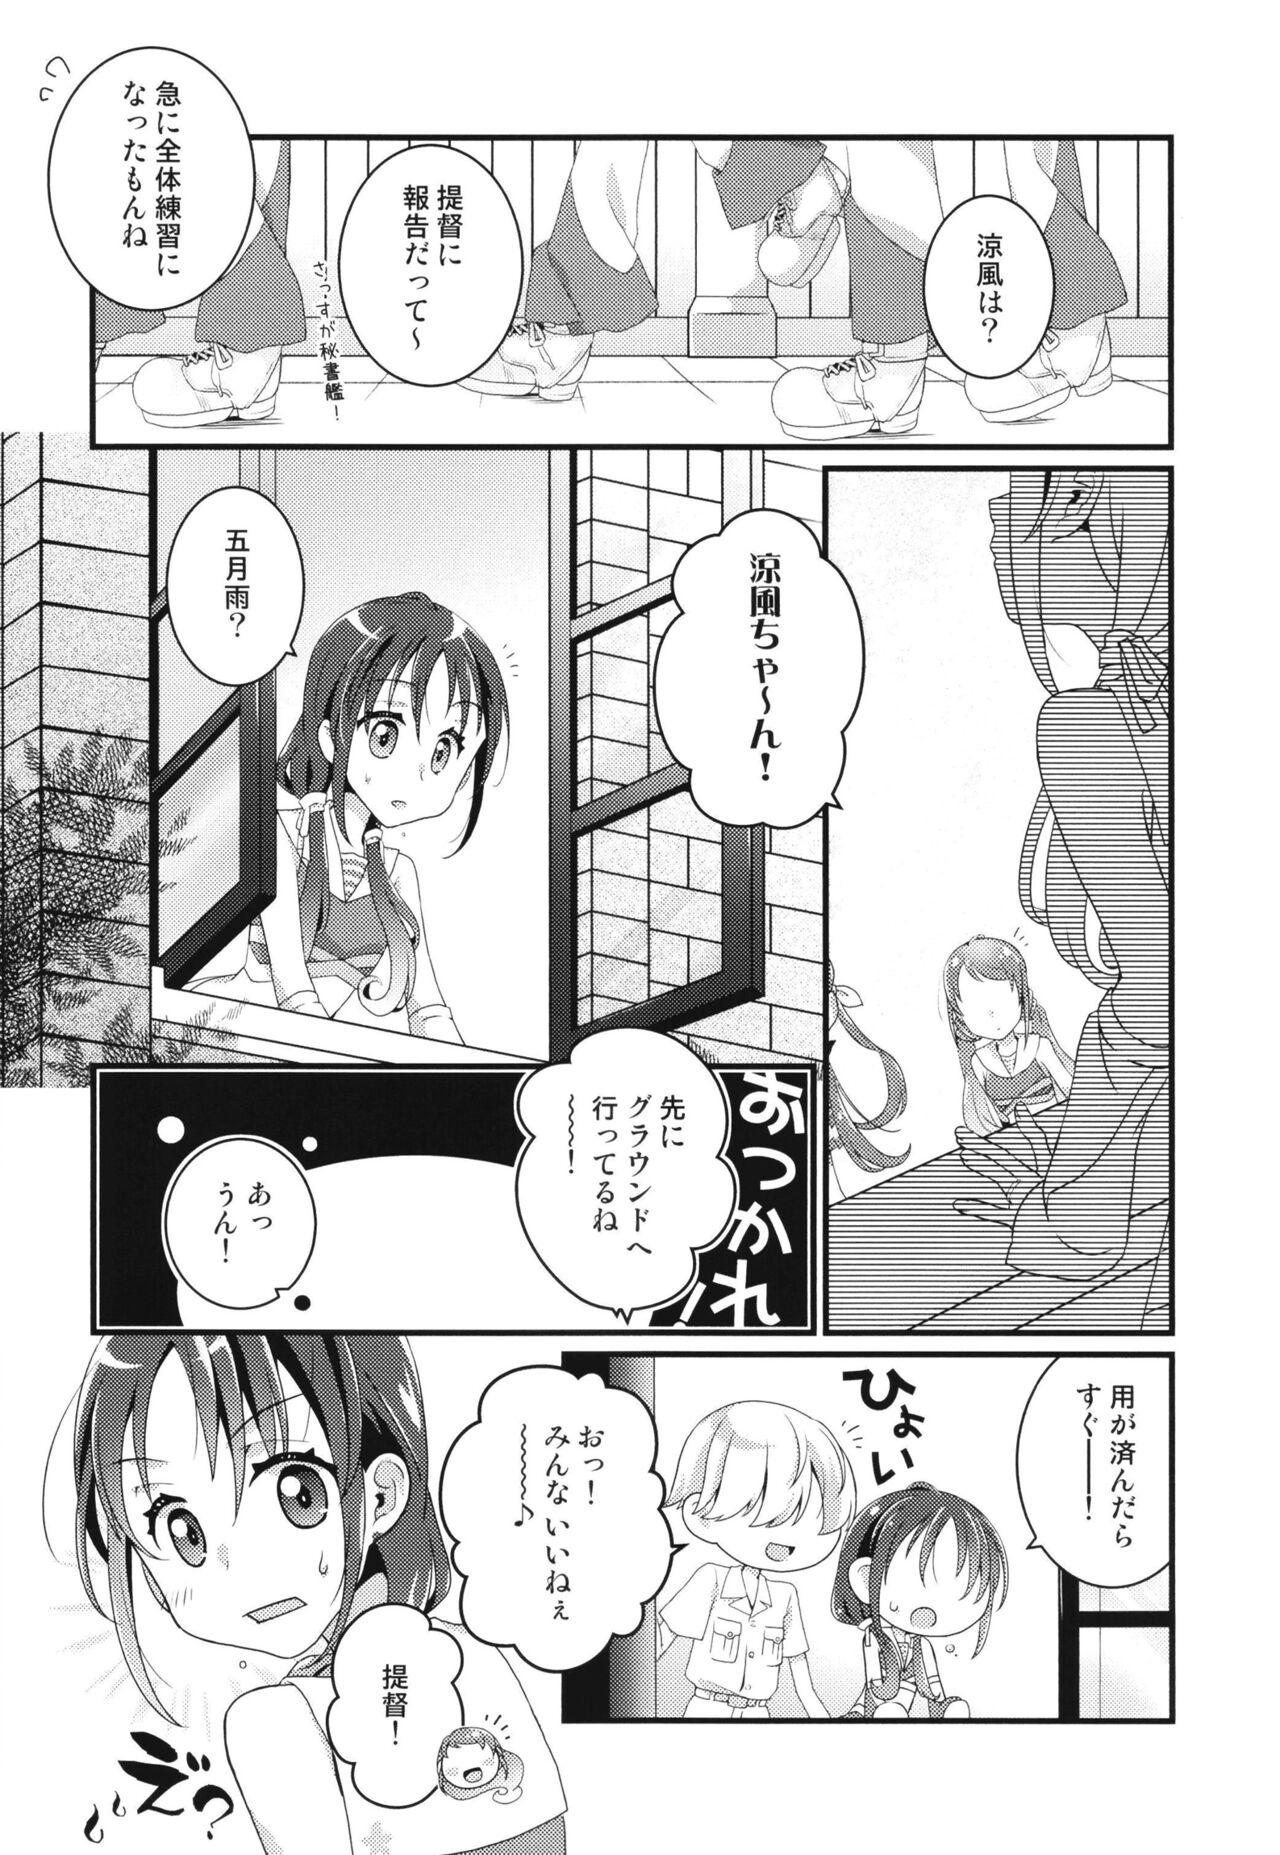 Hot Brunette Yah! Cheer! yeah! - Kantai collection Body Massage - Page 4